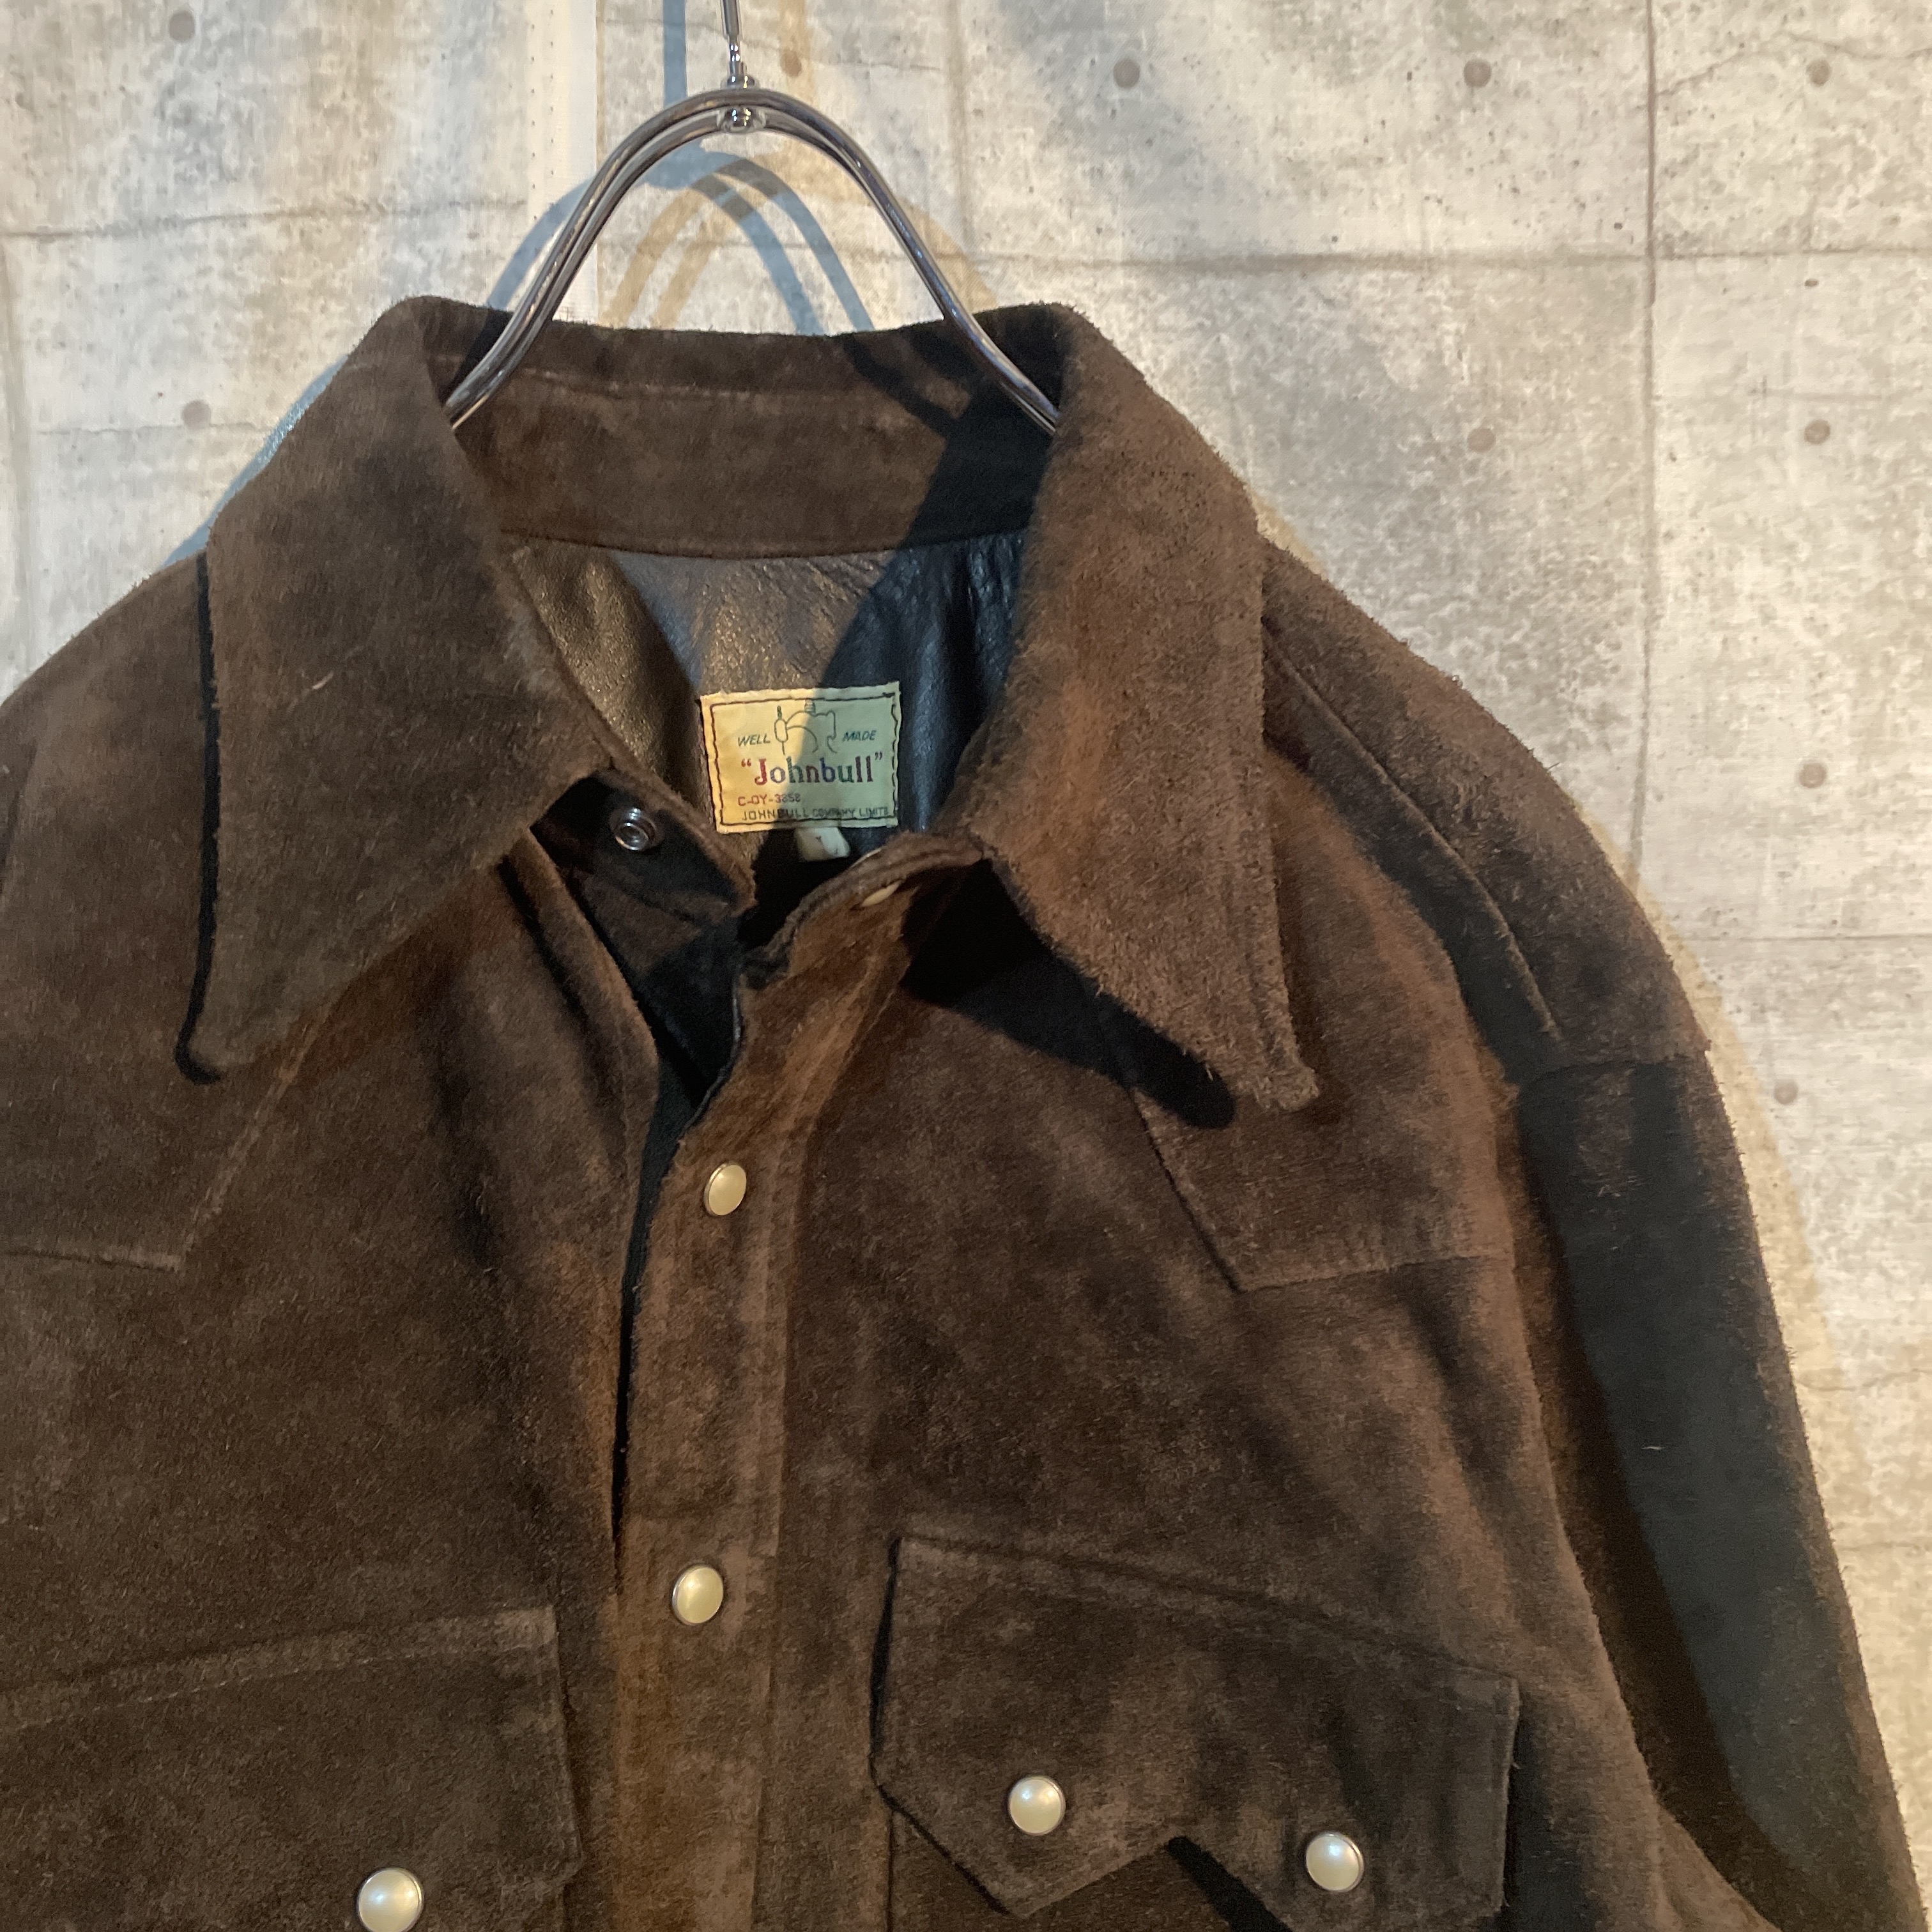 80s jhonbull suede shirt | Vintage.City